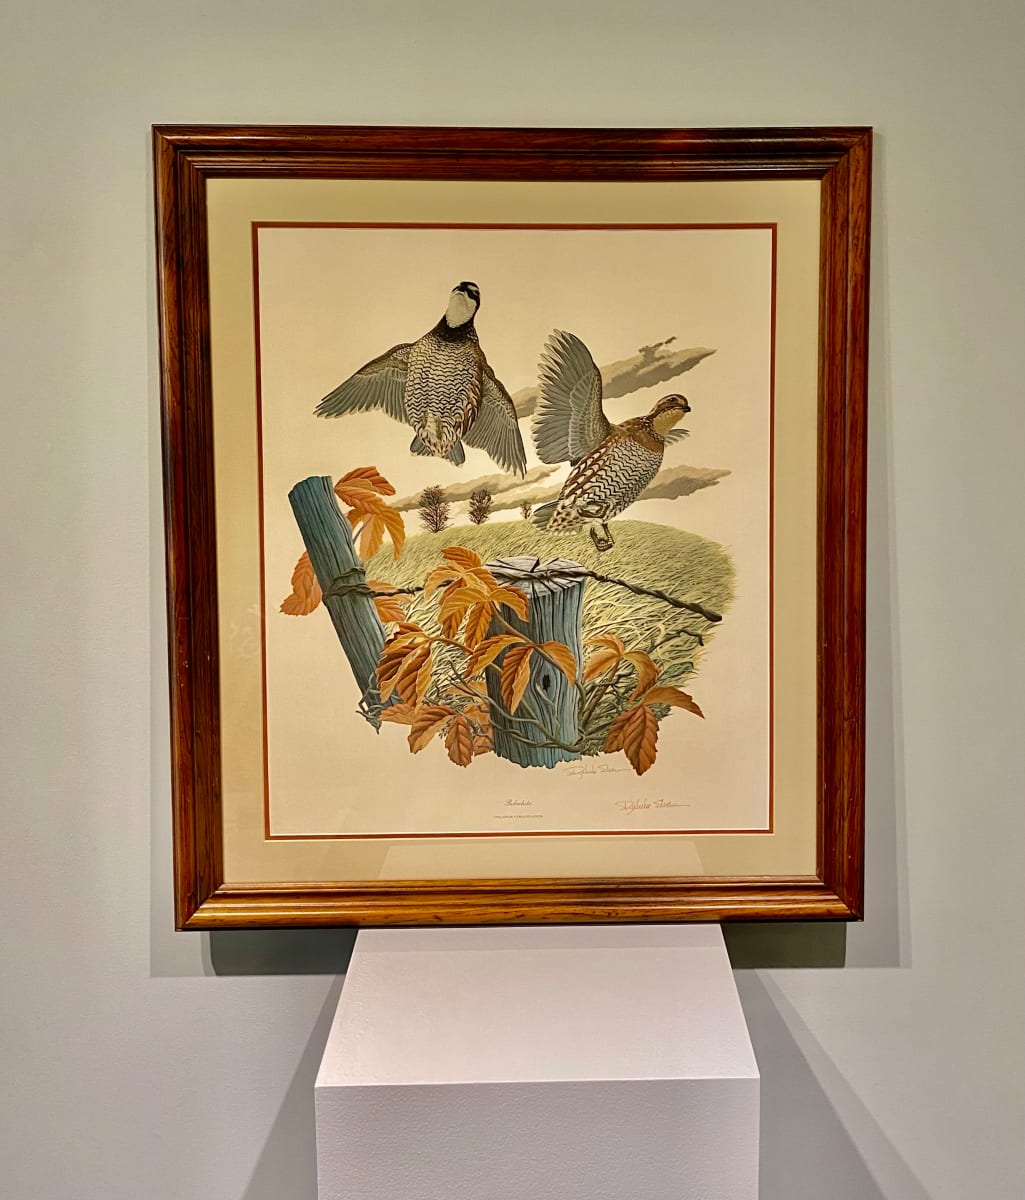 "Bobwhite" a member of the quail bird family - Richard Sloan Limited Edition Print: 1 of 6 - Donated by Paul and Kim Attwater by Richard Sloan  Image: 1 of 6 various wildlife scenes available by renowned artist Richard Sloan